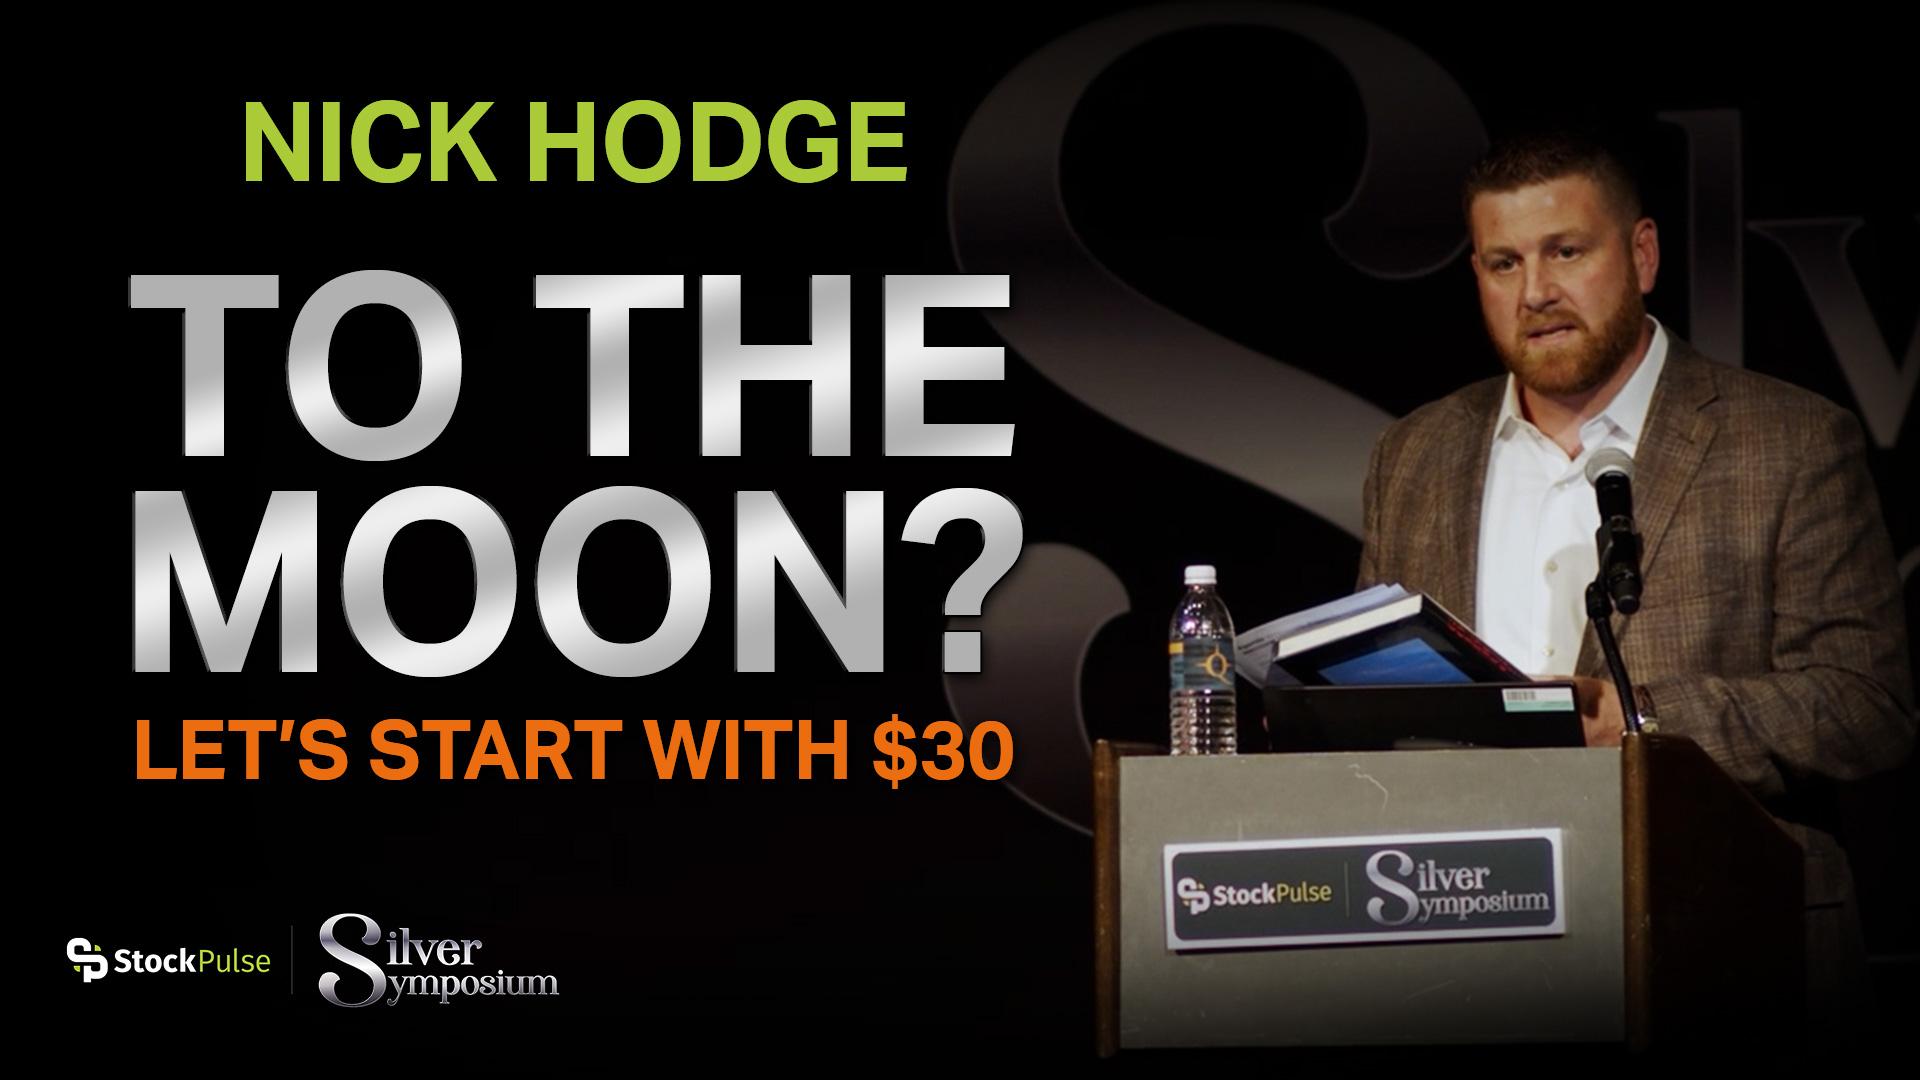 Nick Hodge: To the Moon? Let’s Start with $30